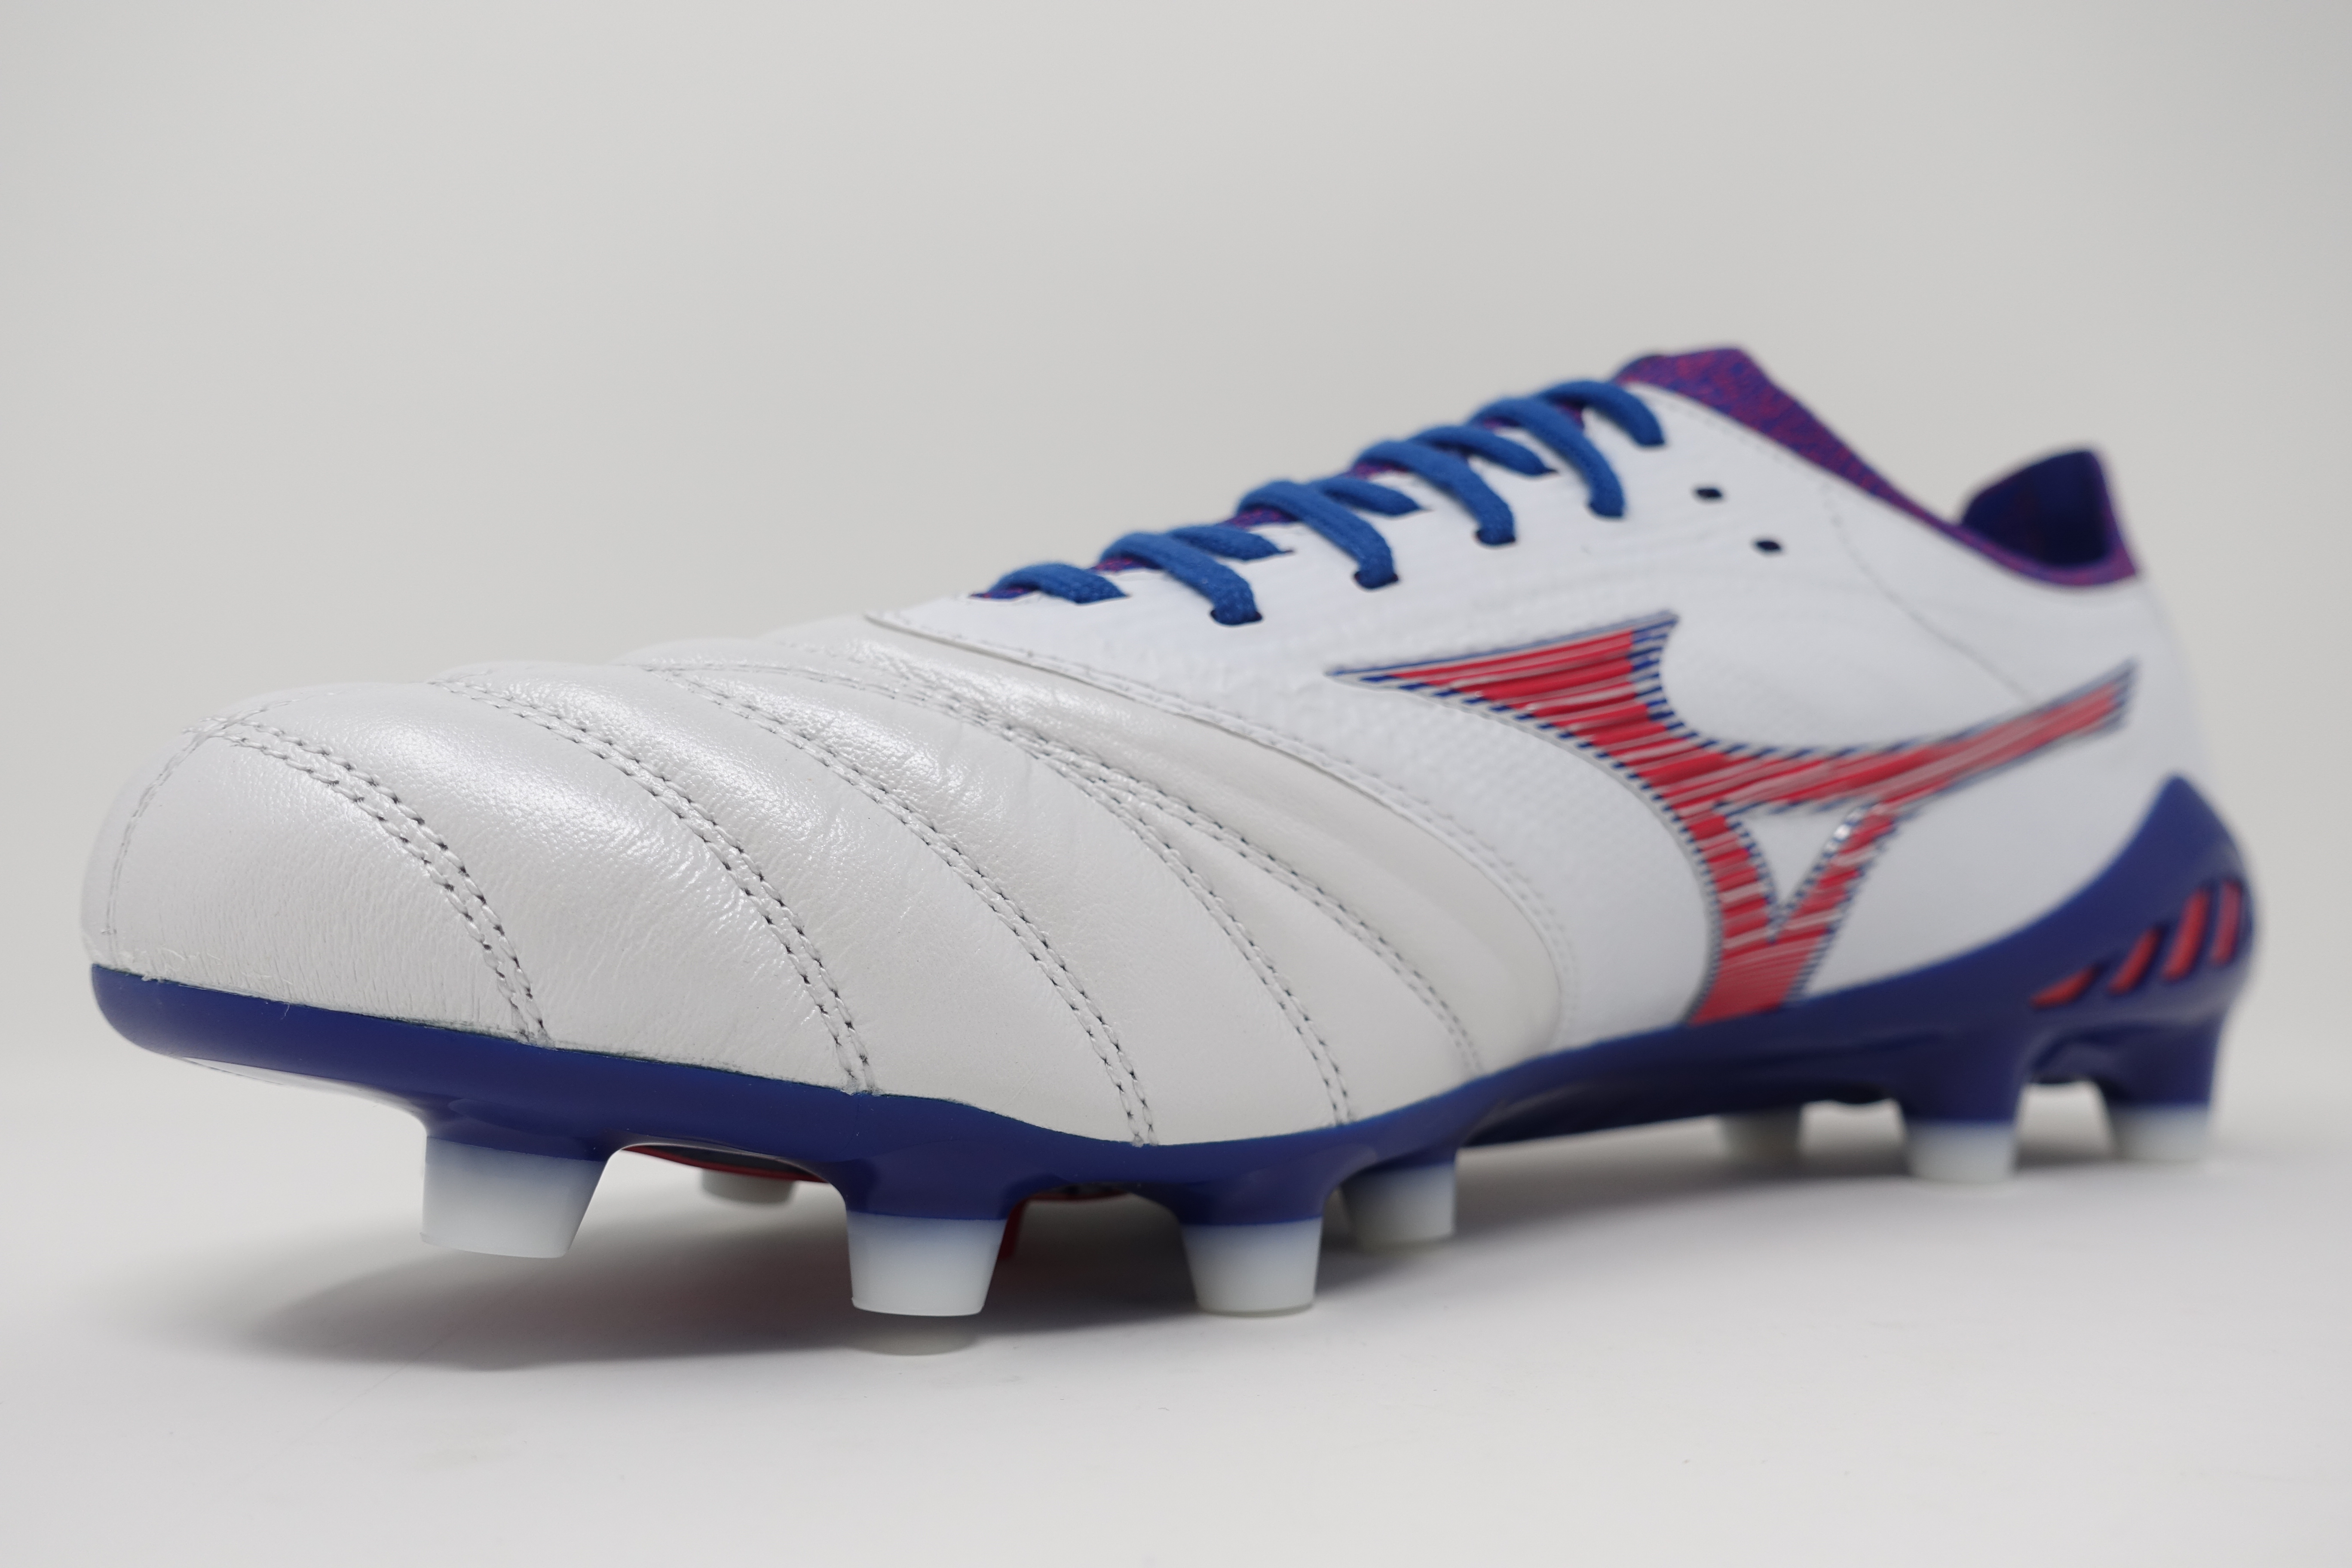 Mizuno-Morelia-Neo-3-Made-in-Japan-Next-Wave-Pack-Soccer-Football-Boots-13